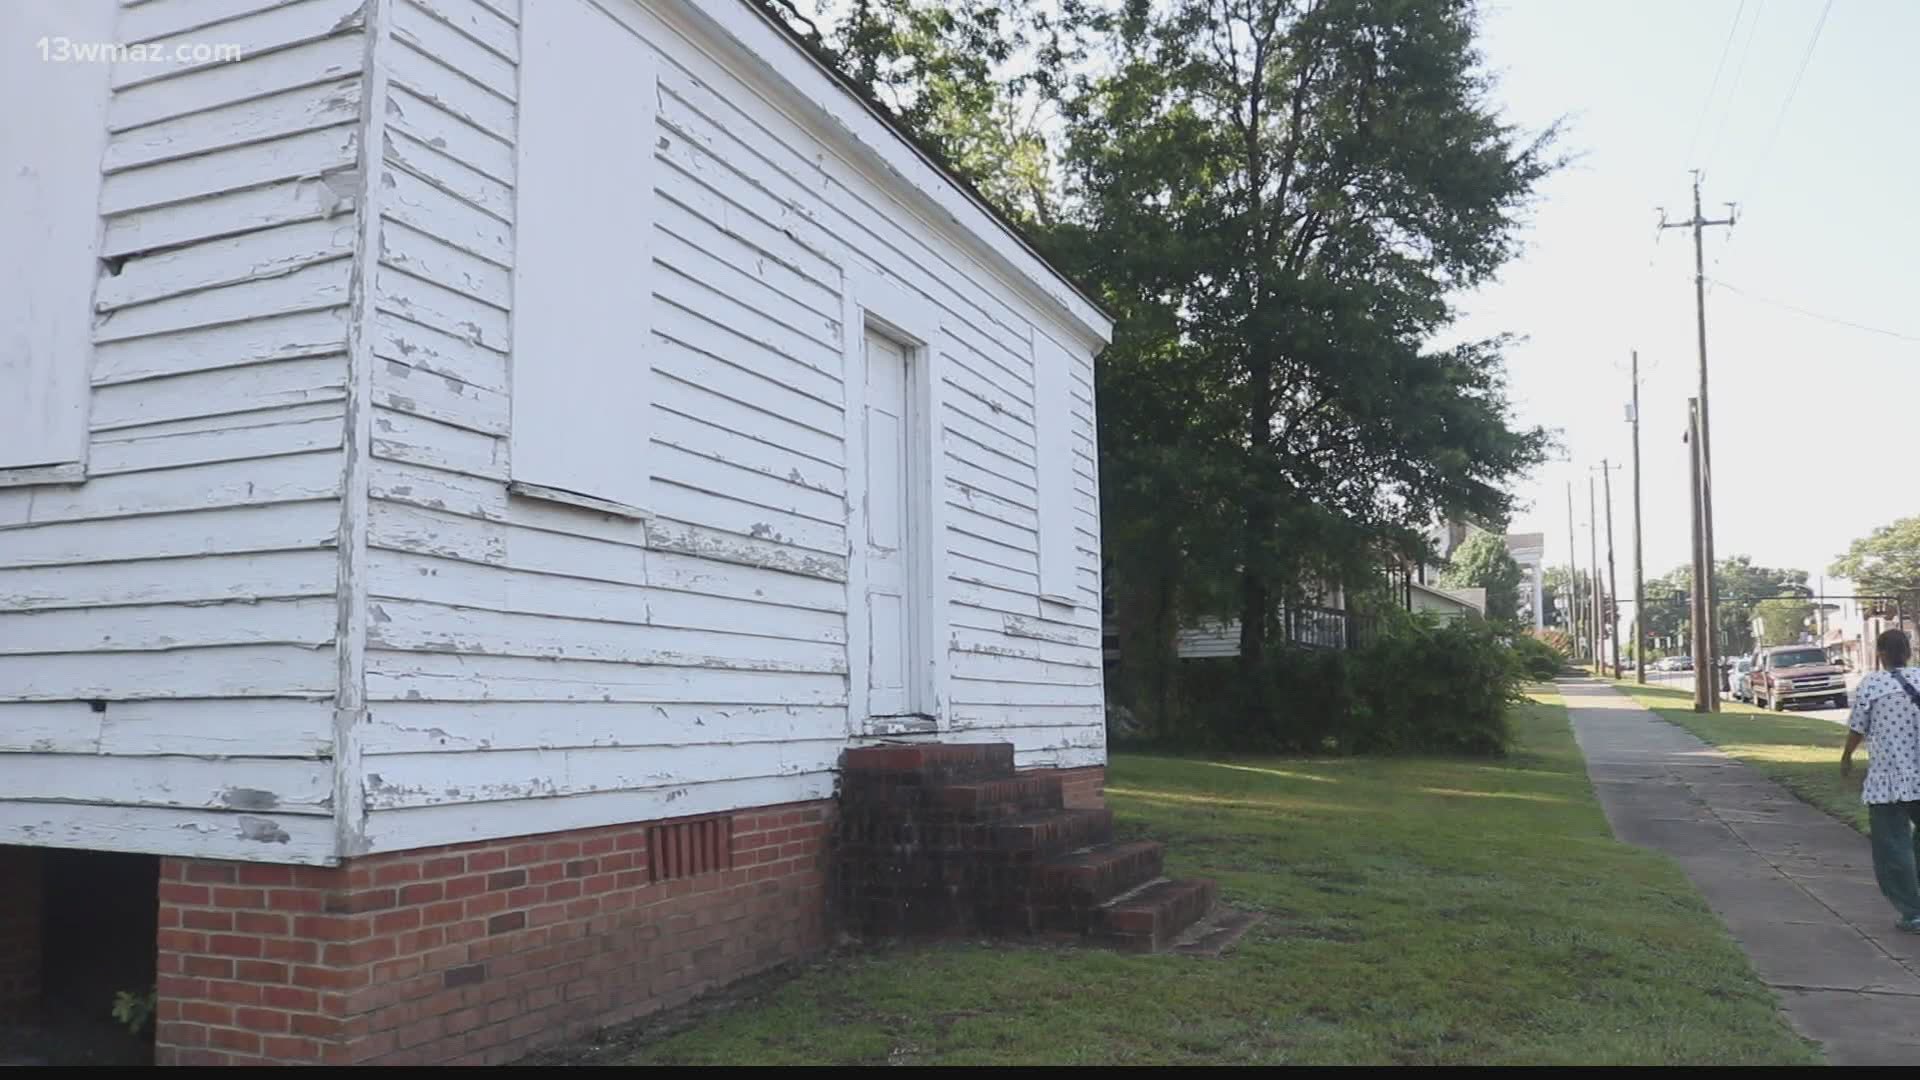 One of Milledgeville's oldest buildings is about to get a face-lift